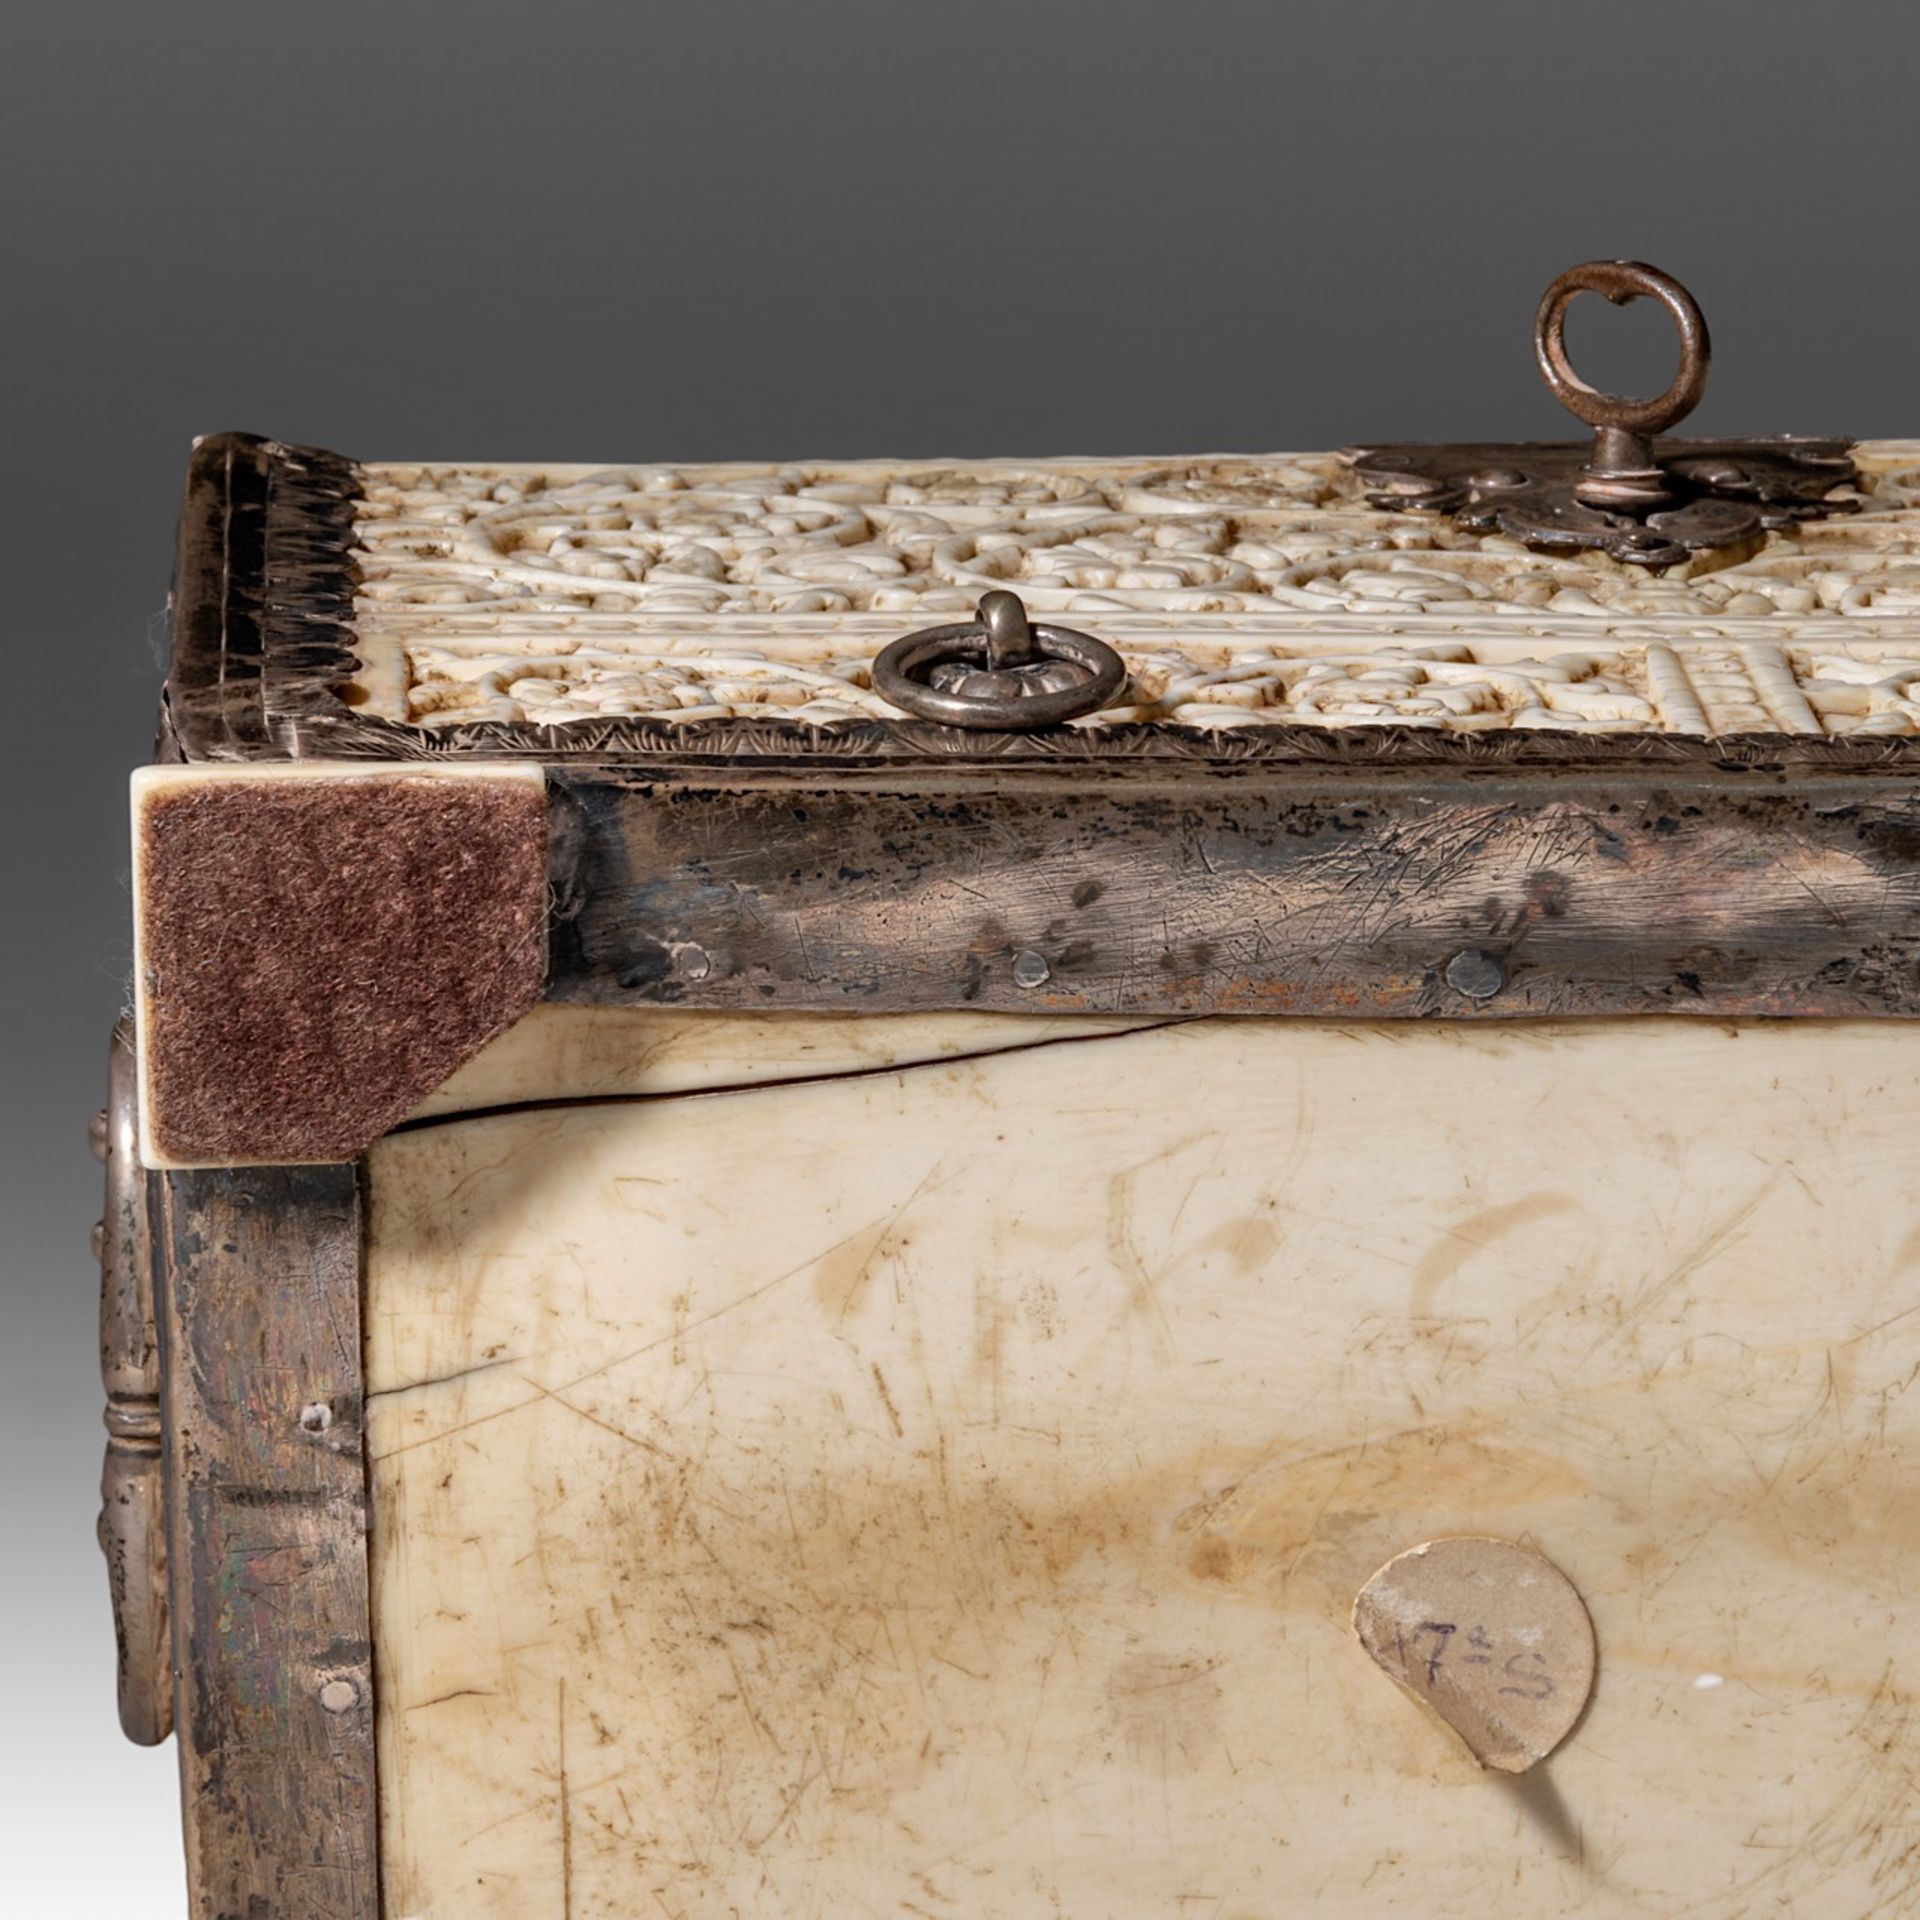 A 17th/18th-century Sinhalese (Sri Lanka) ivory jewelry casket, H 13,5 - W 19,3 - D 10,1 cm / total - Image 9 of 11